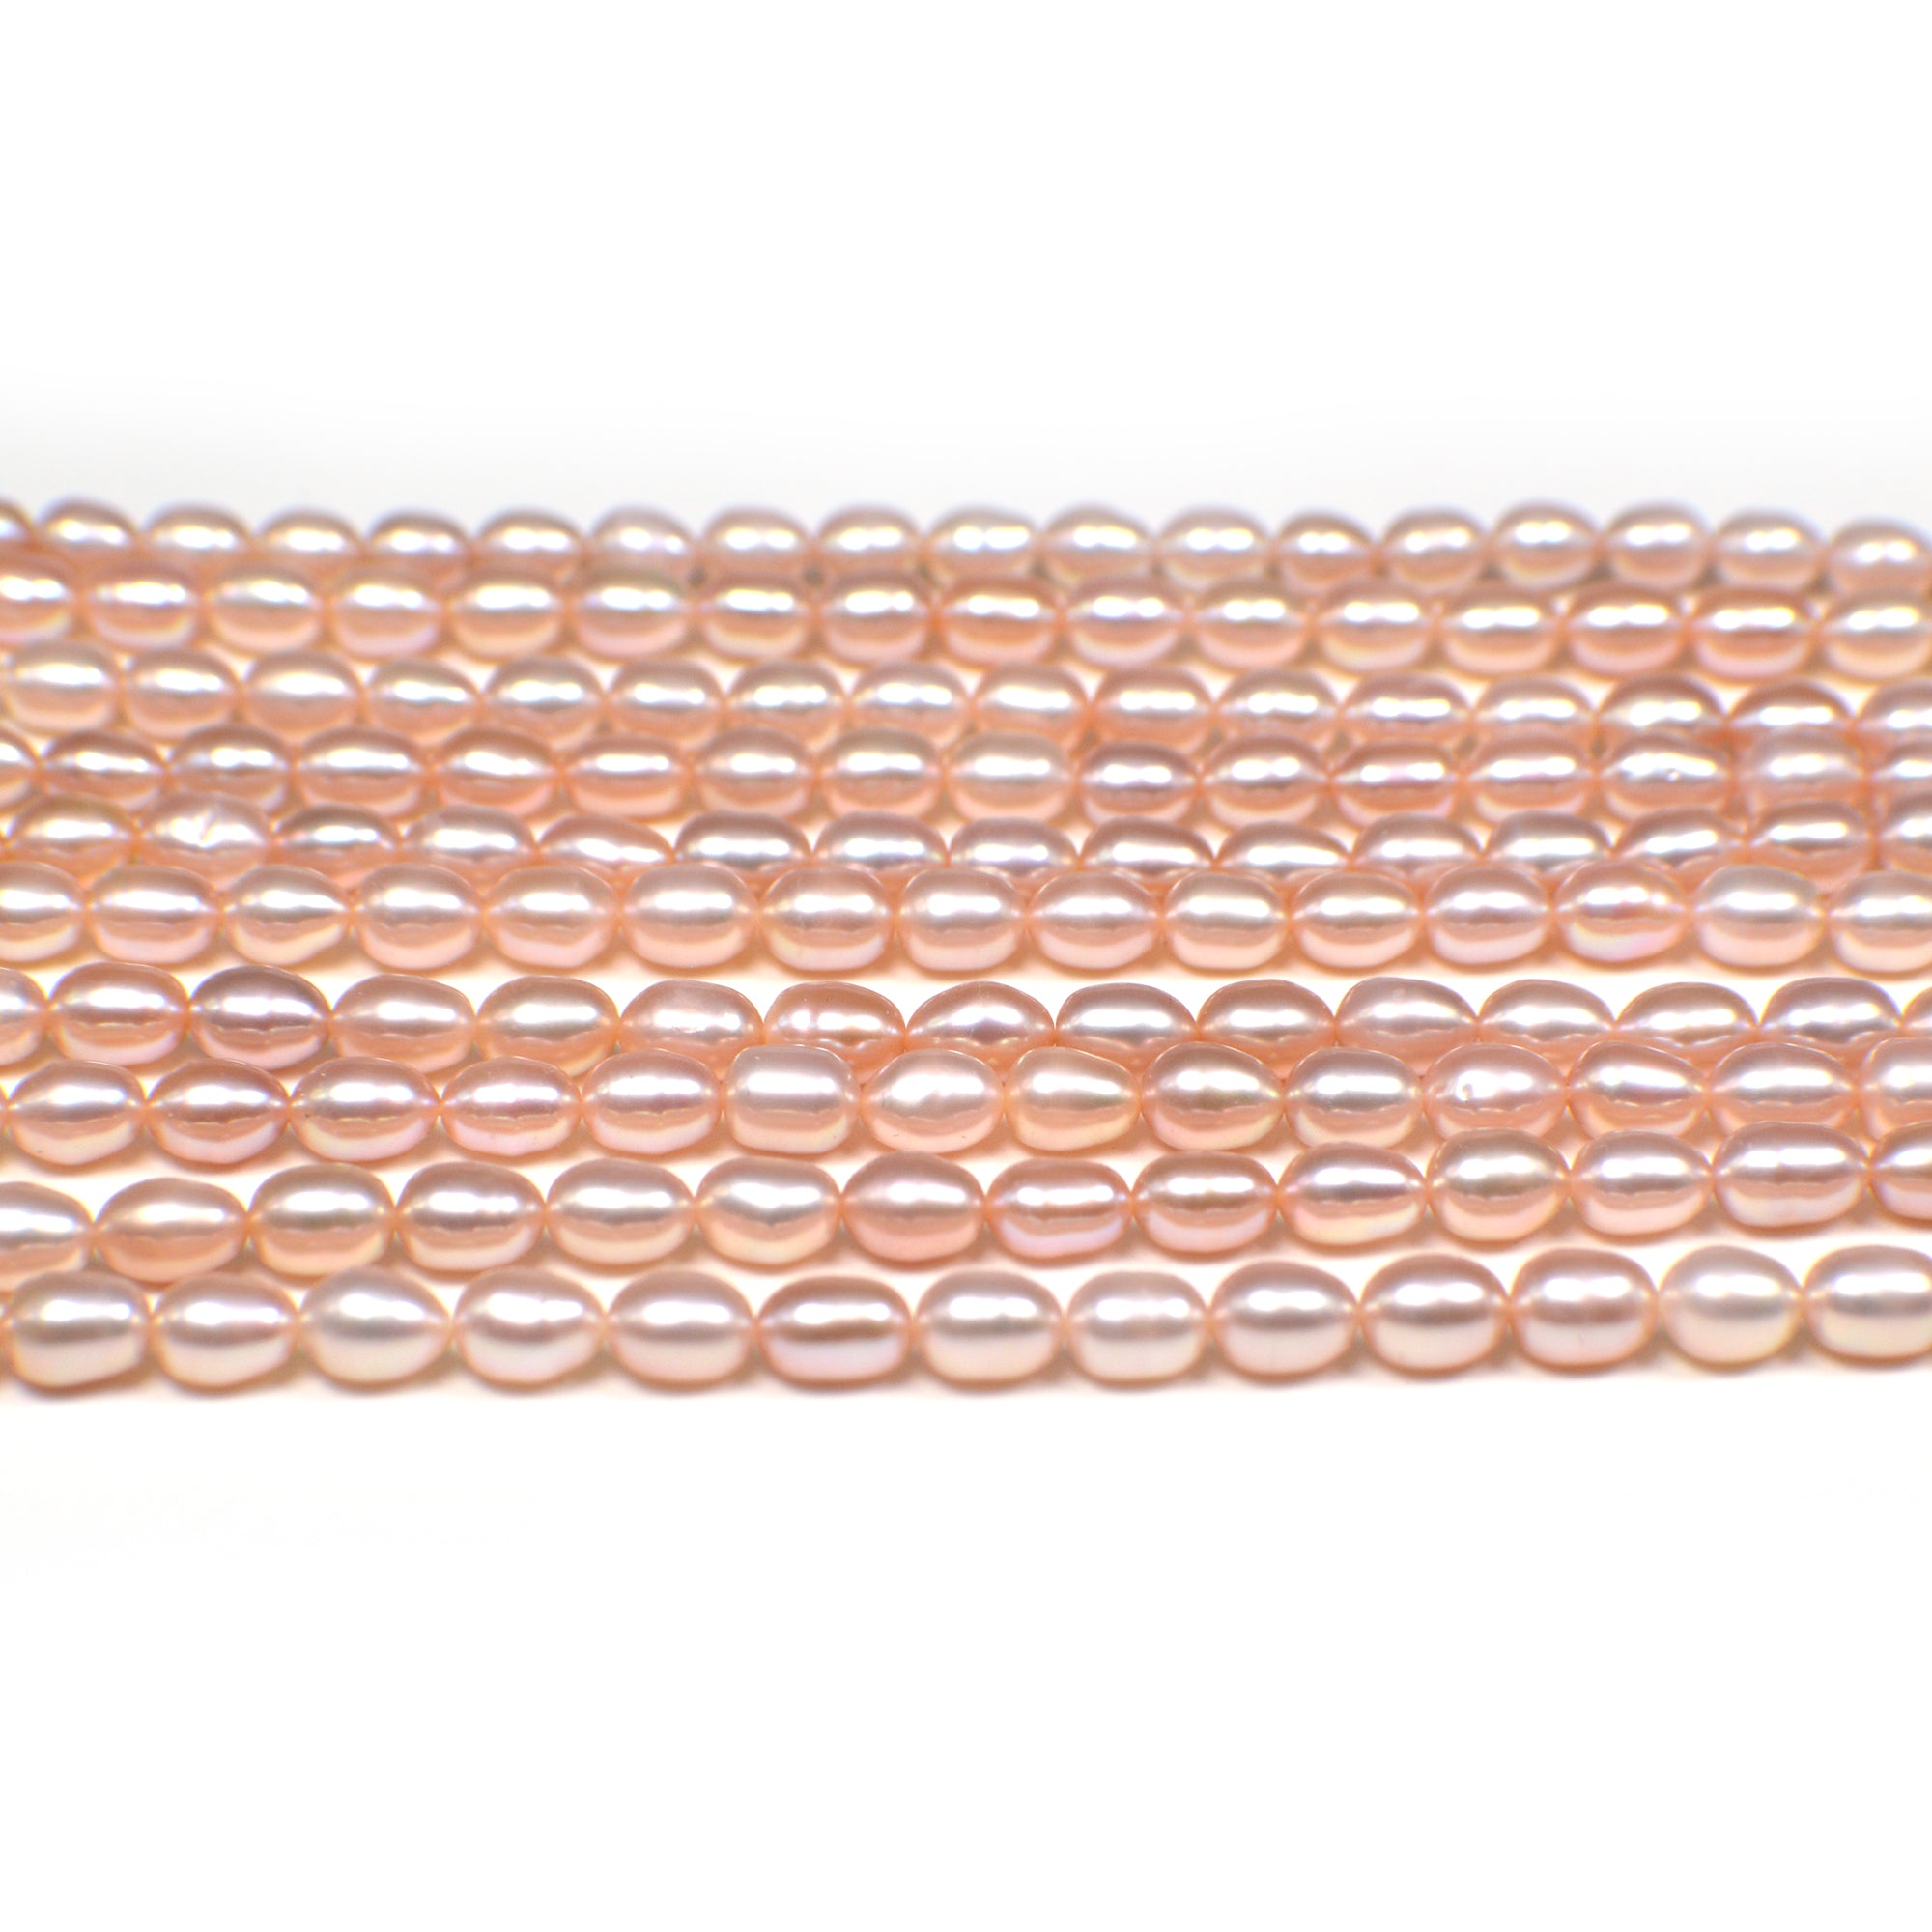 5x4 - 6x4 MM Pink Peach Rice Freshwater Pearls Beads